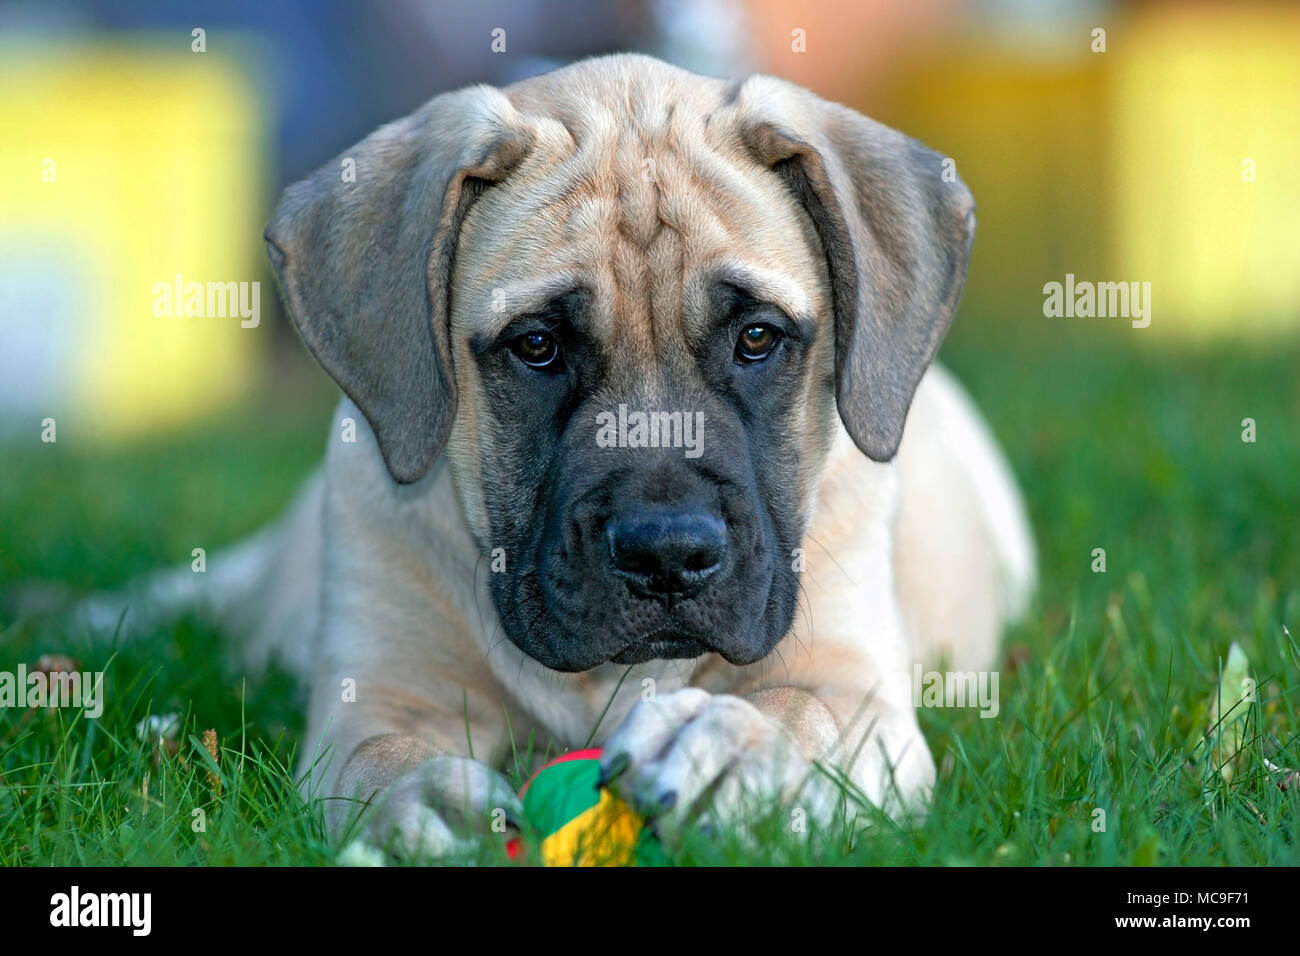 English Mastiff High Resolution Stock Photography and Images - Alamy